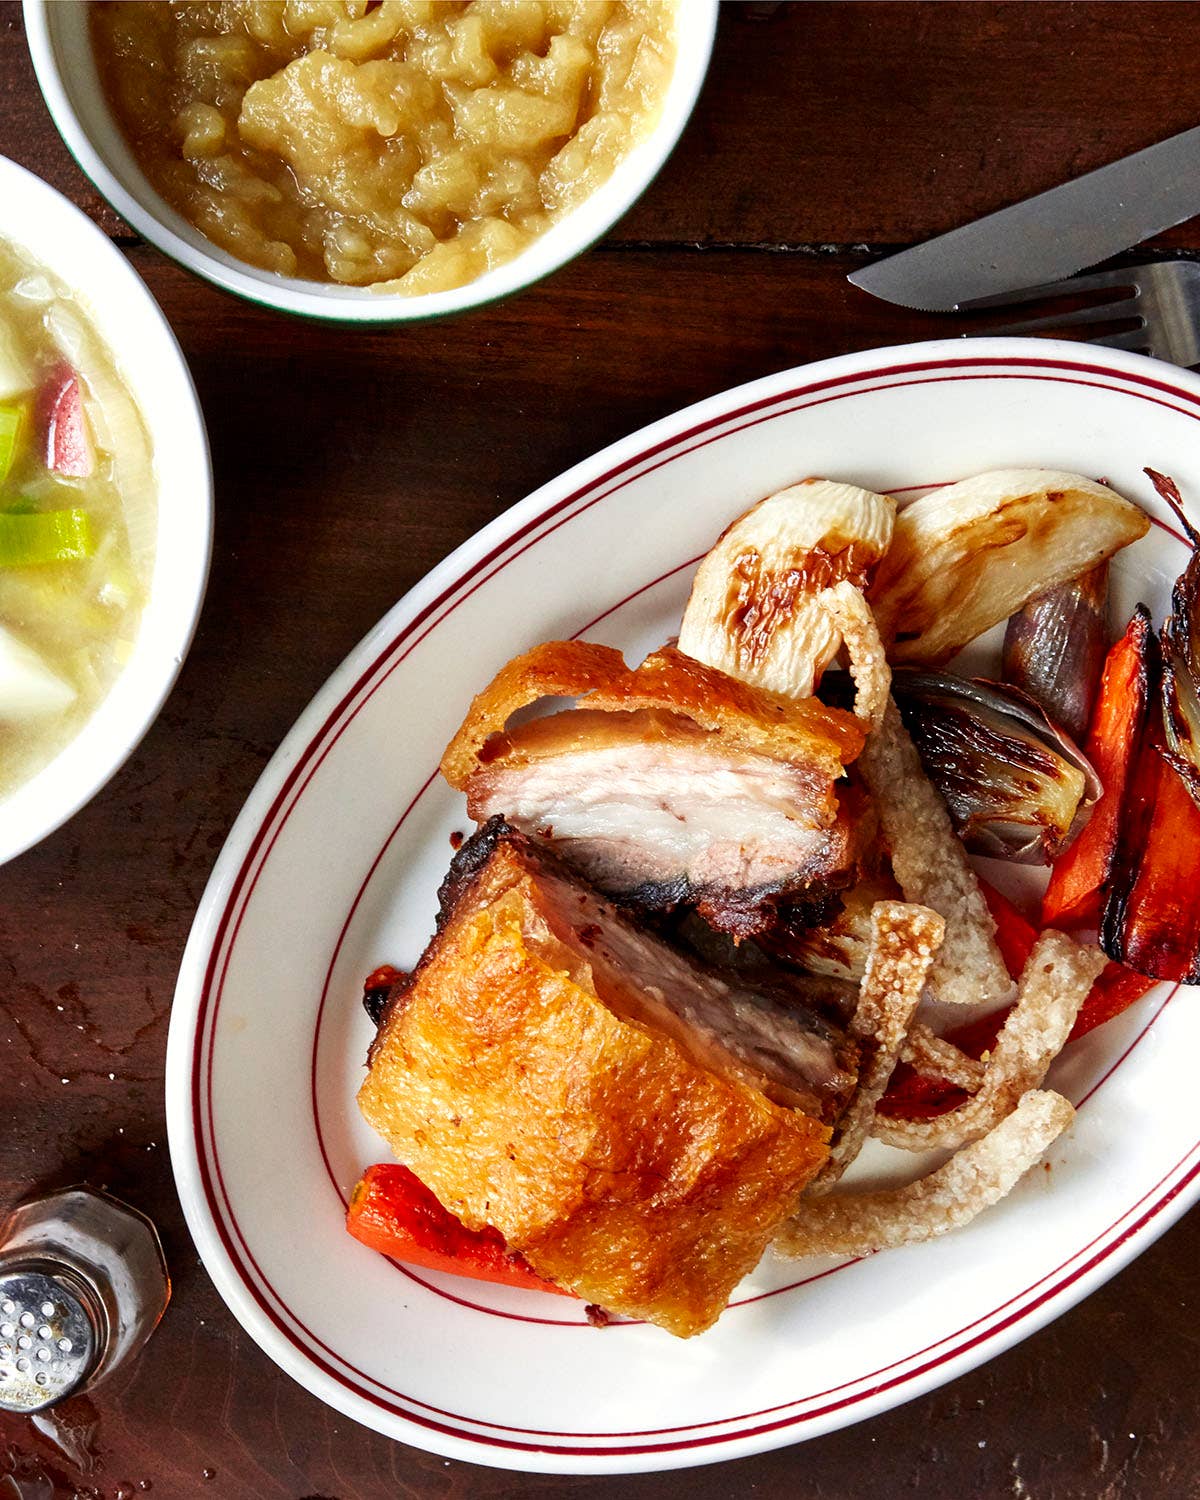 Crispy Pork Belly with Roasted Vegetables and Applesauce